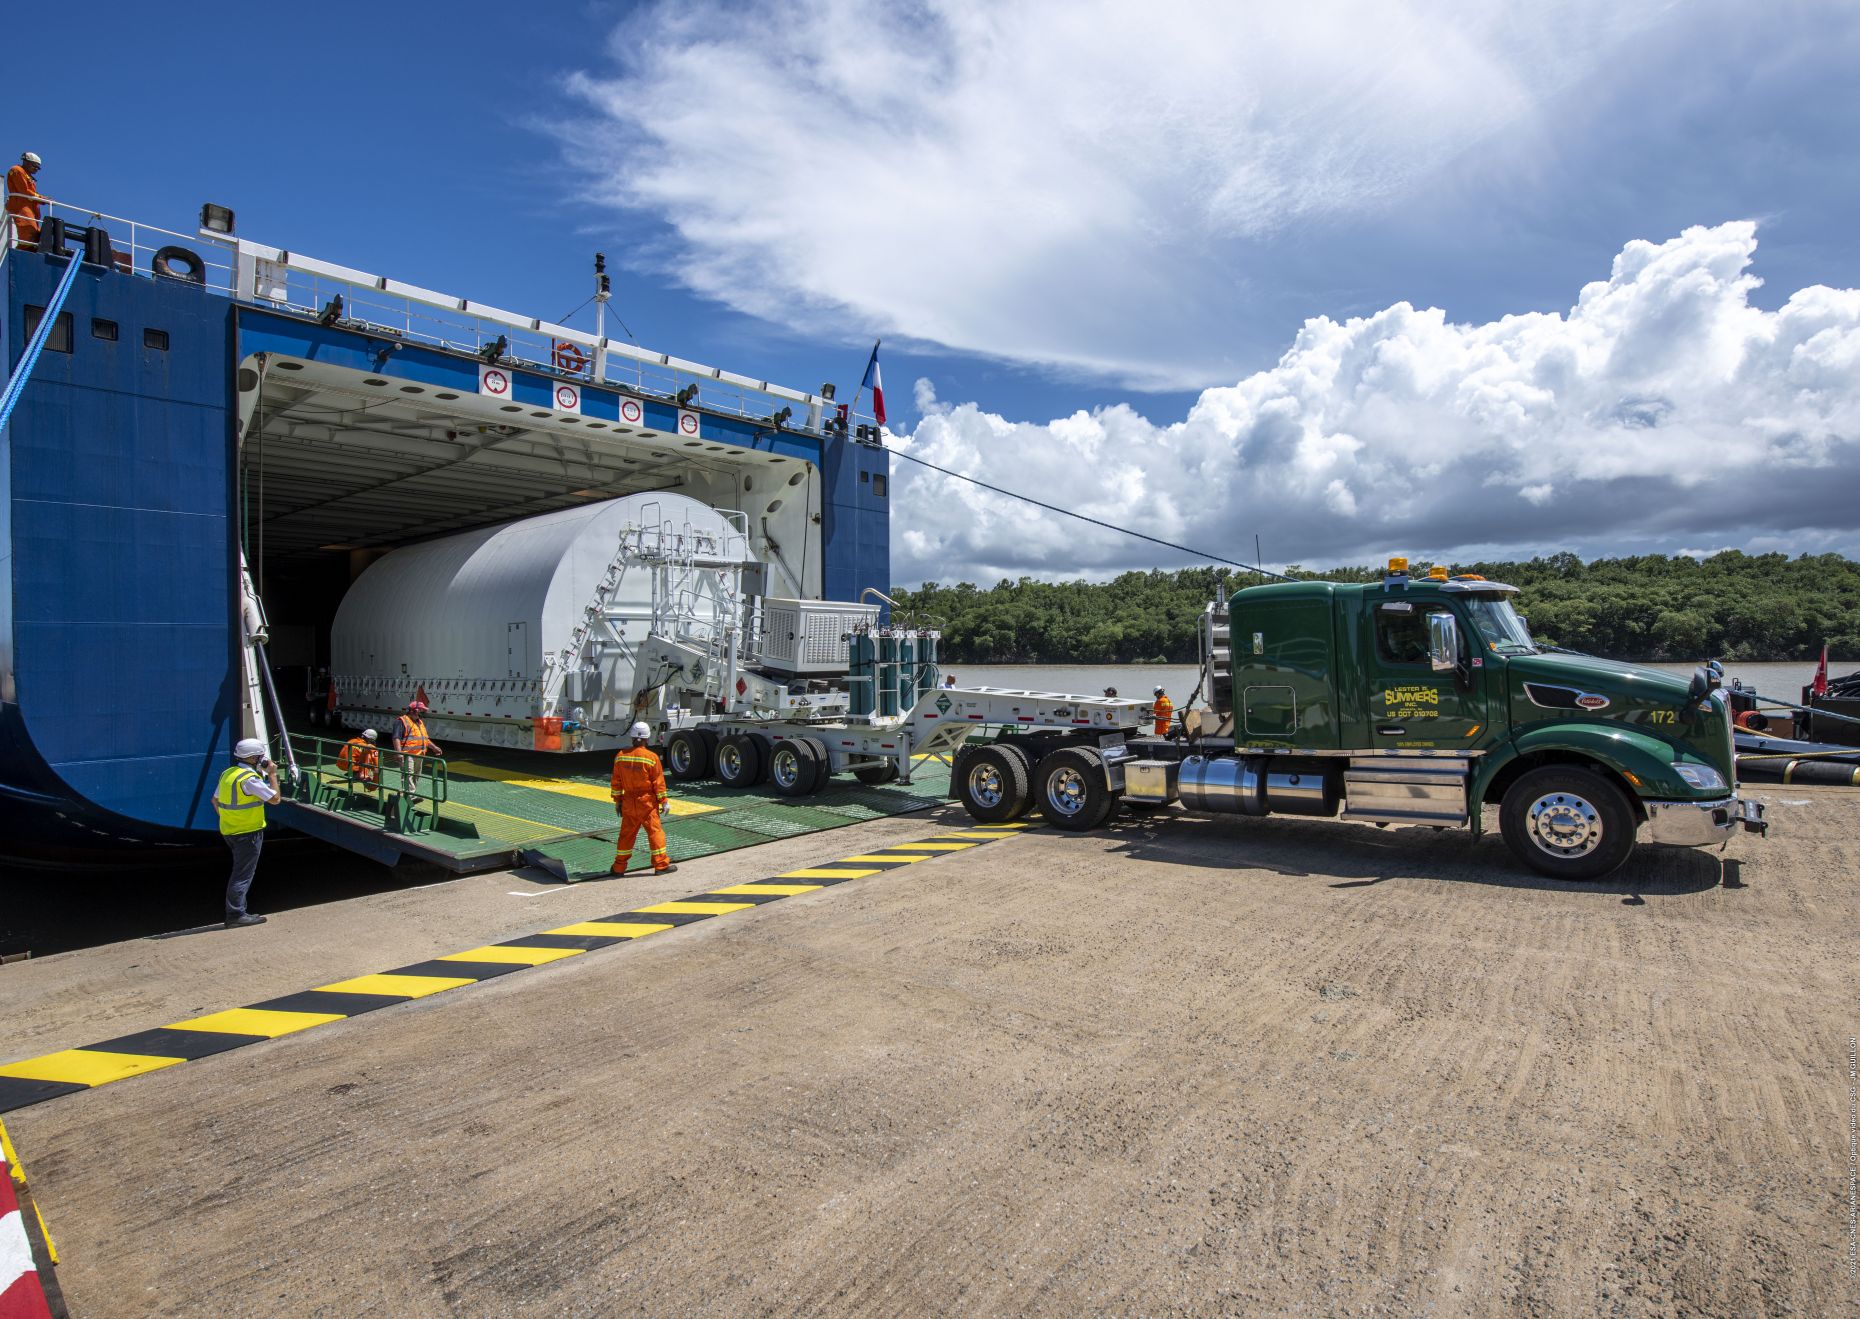 The James Webb Space Telescope arrived safely at Pariacabo harbour in French Guiana on 12 October 2021 ahead of its launch on an Ariane 5 rocket from Europe's Spaceport.